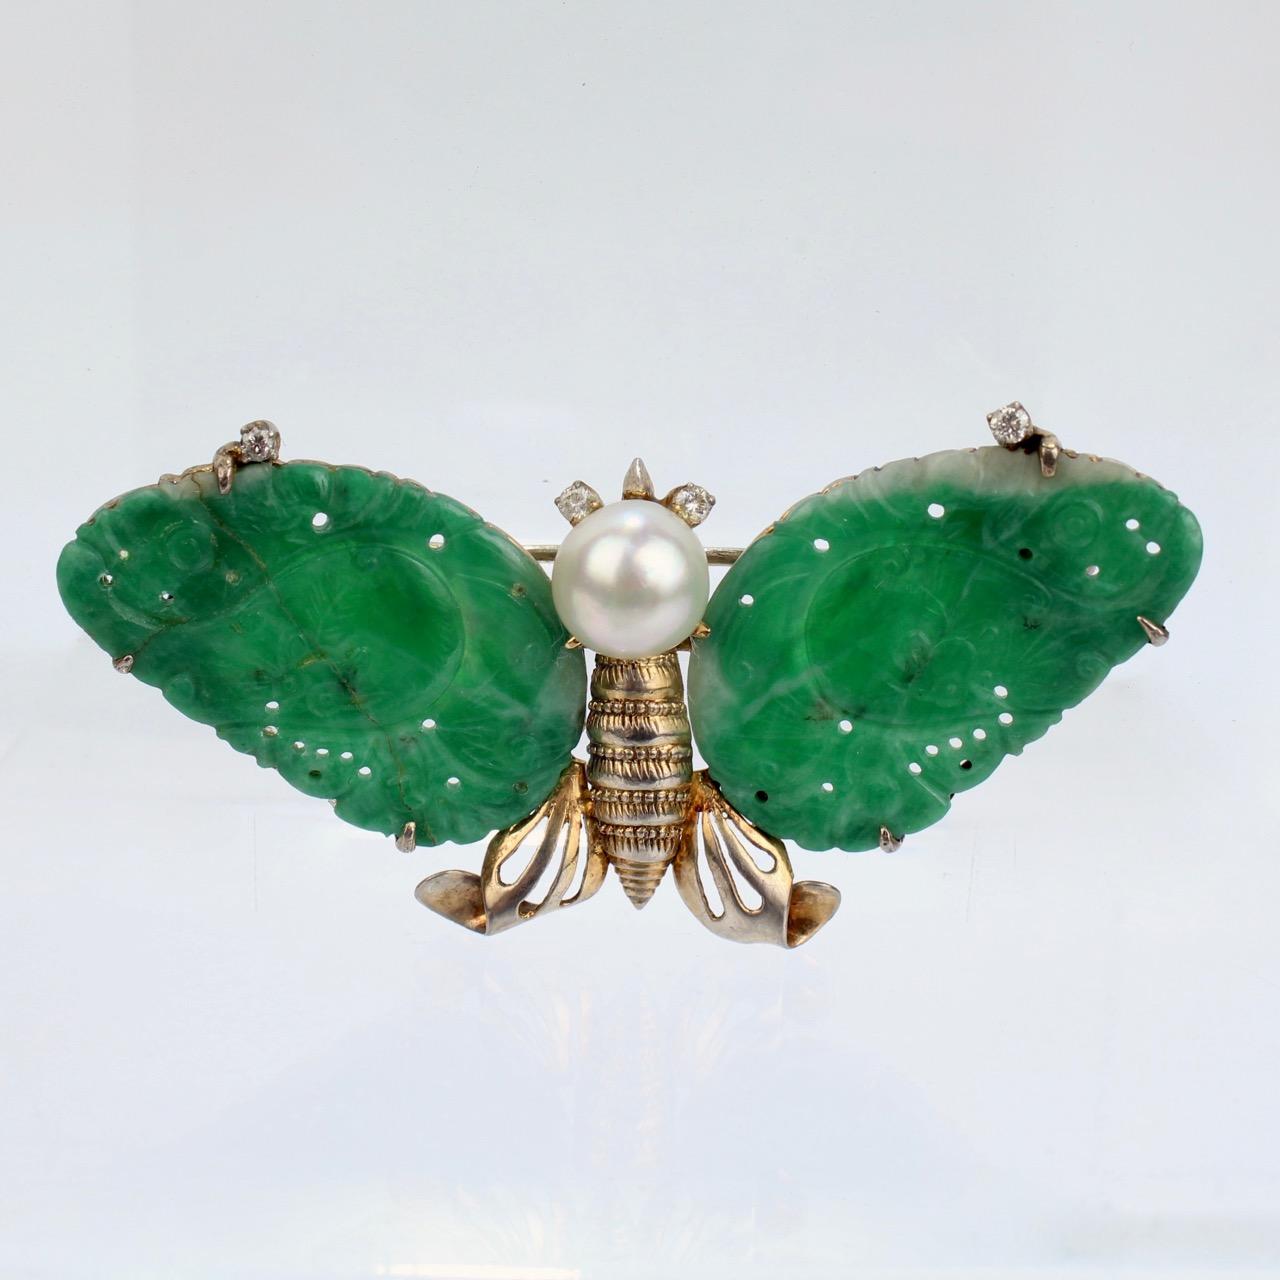 A fine old or antique Chinese butterfly brooch or pin.

In 14k yellow gold.

Set with carved jadeite plaques as wings, a round white pearl for the head, and small round diamonds as eyes. 

Simply a wonderful figural brooch!

Date:
20th